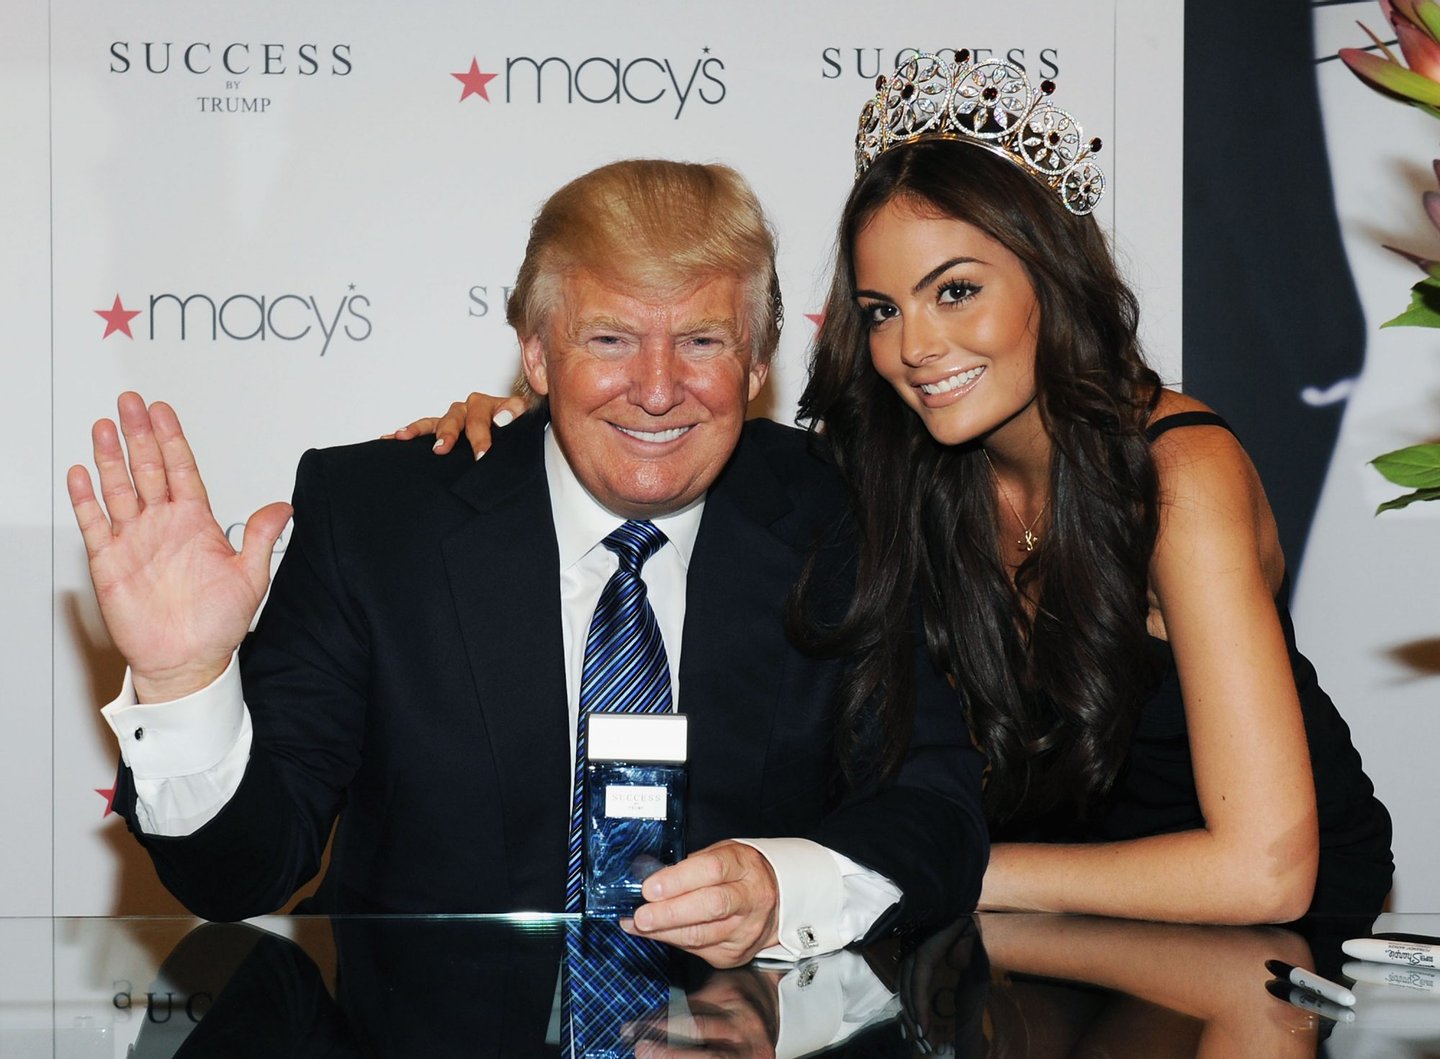 NEW YORK, NY - APRIL 18: Business mogul/TV personality Donald Trump and Miss Universe 2010 Ximena Navarrete (R) attend the Success by Trump fragrance launch at Macy's Herald Square on April 18, 2012 in New York City. (Photo by Slaven Vlasic/Getty Images)